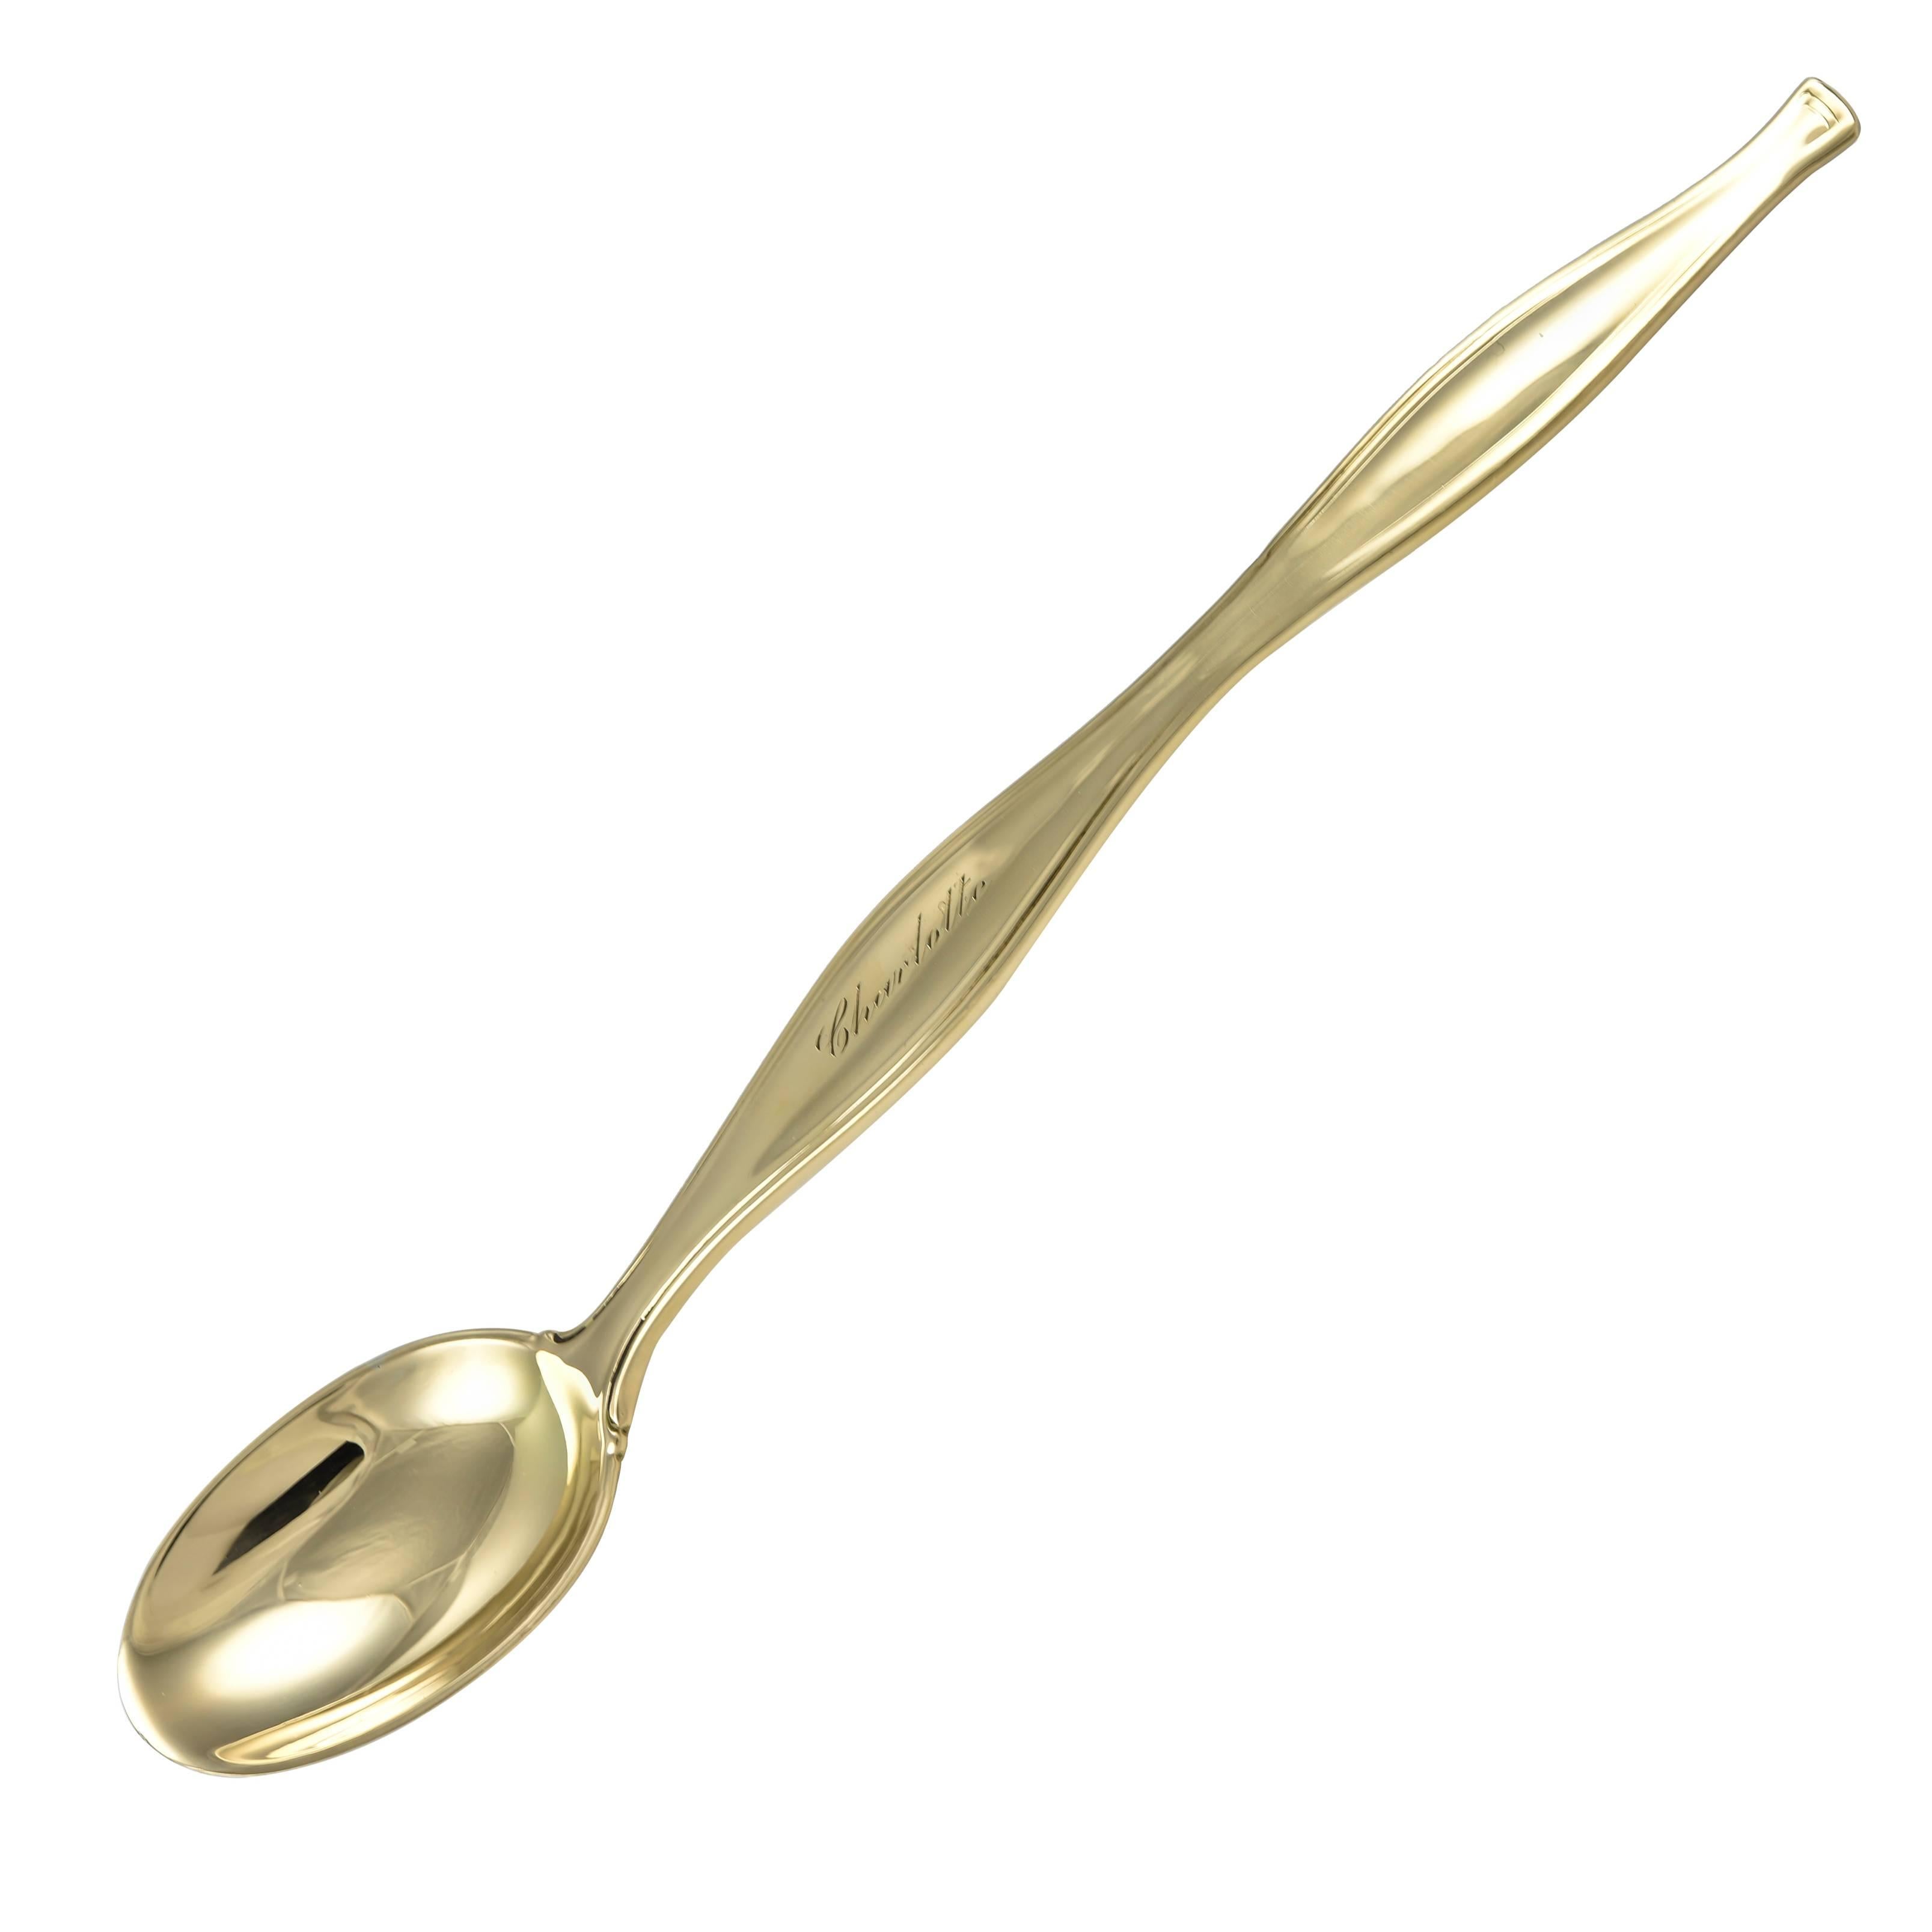 Tiffany & Co. Gold Baby Spoon for Charlotte